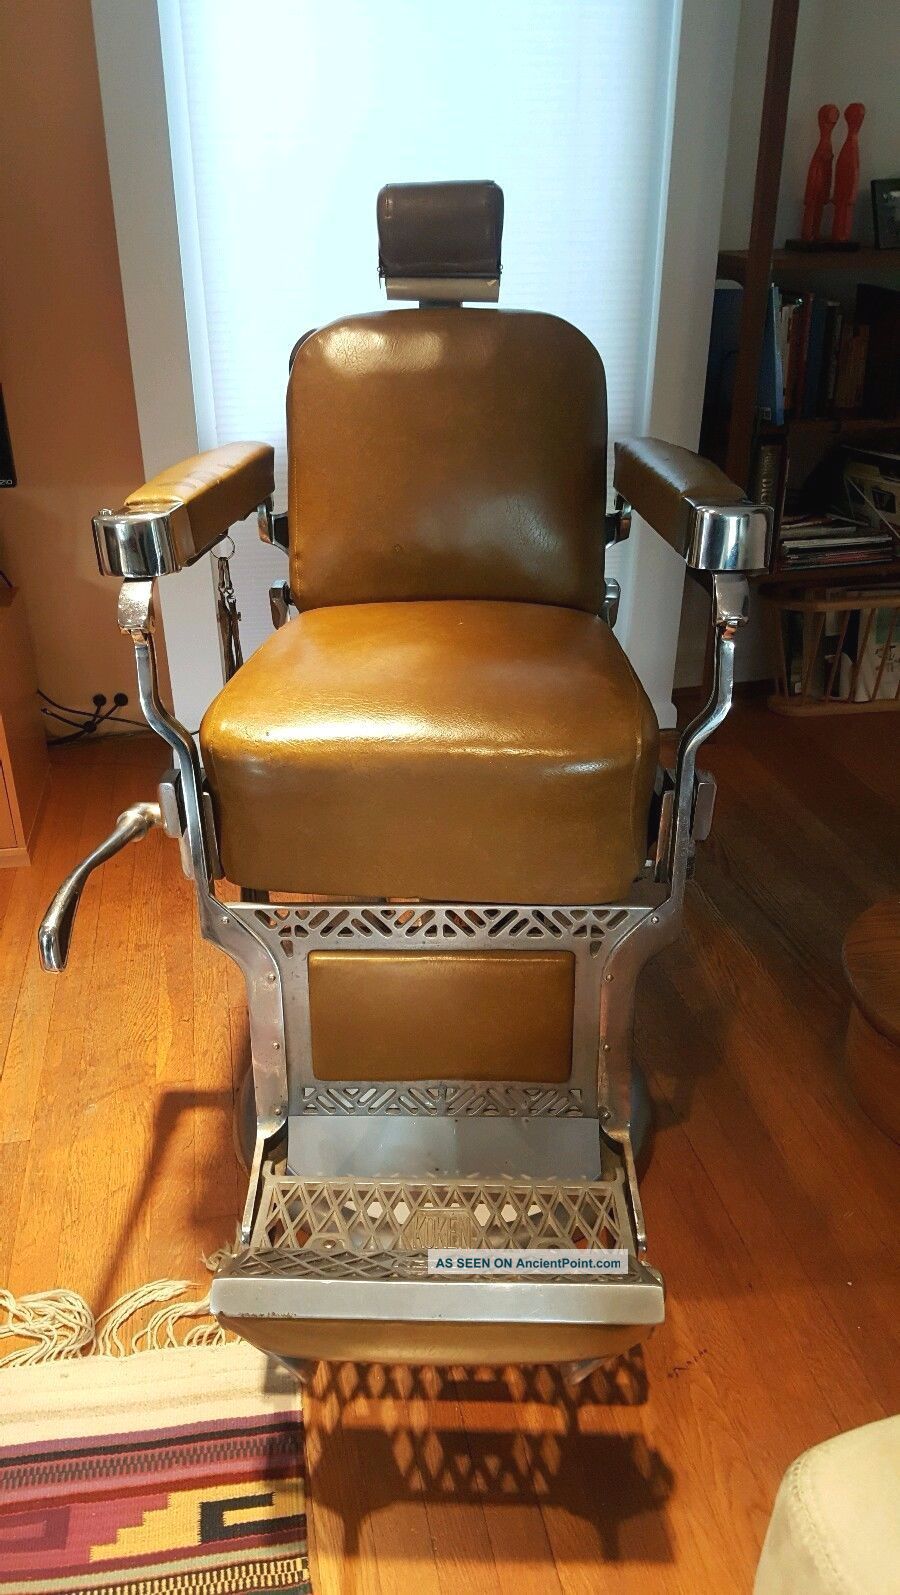 Vintage Koken Barber Chair Hydraulic Lift Porcelain Base 1930 - 50 ' S Strops Good Barber Chairs photo